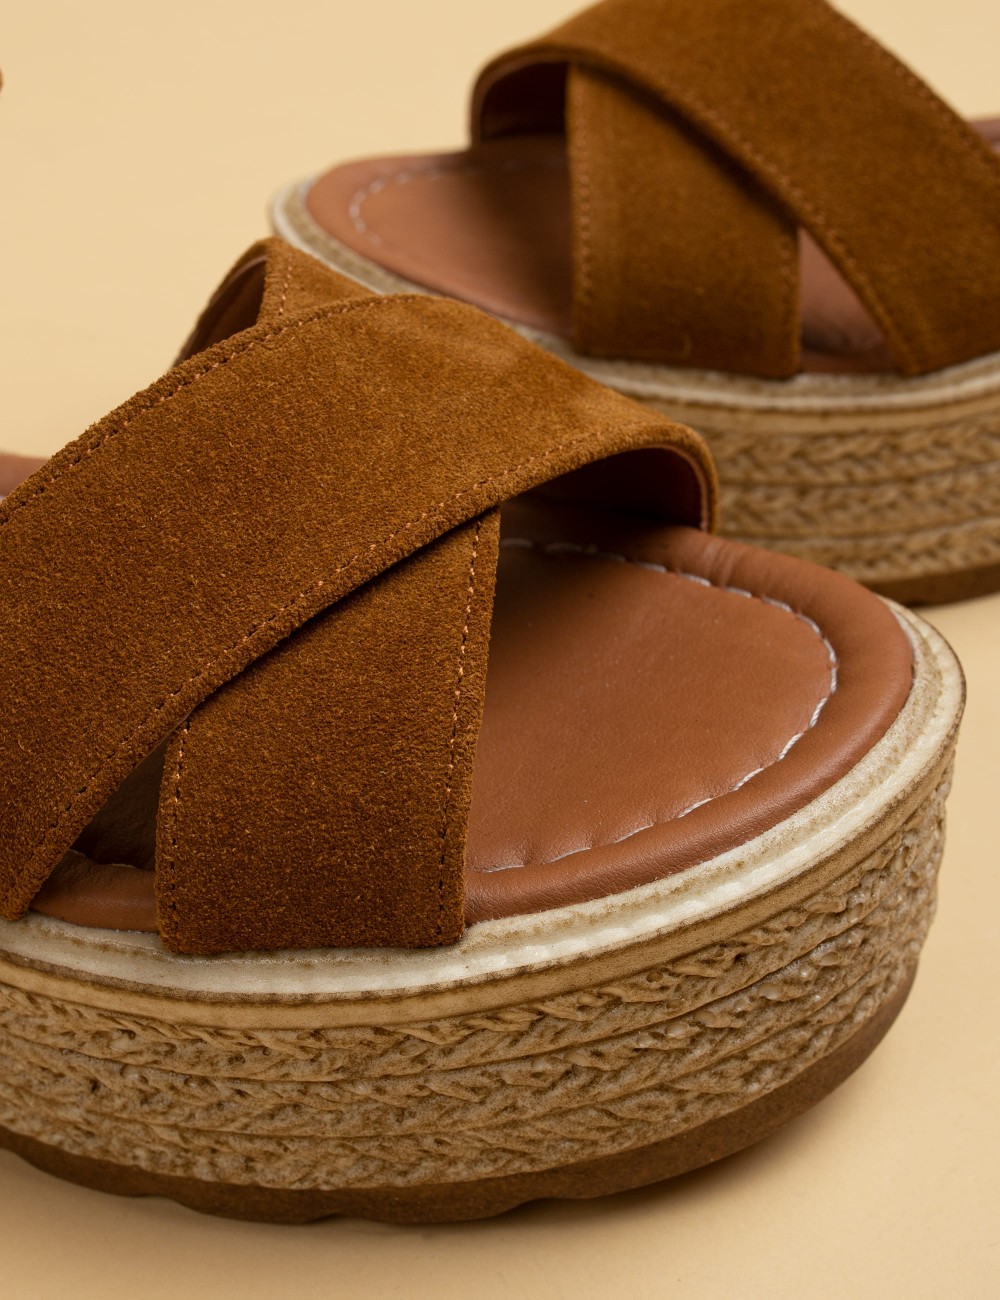 Tan Suede Leather Sandals - B0500ZTBAP01